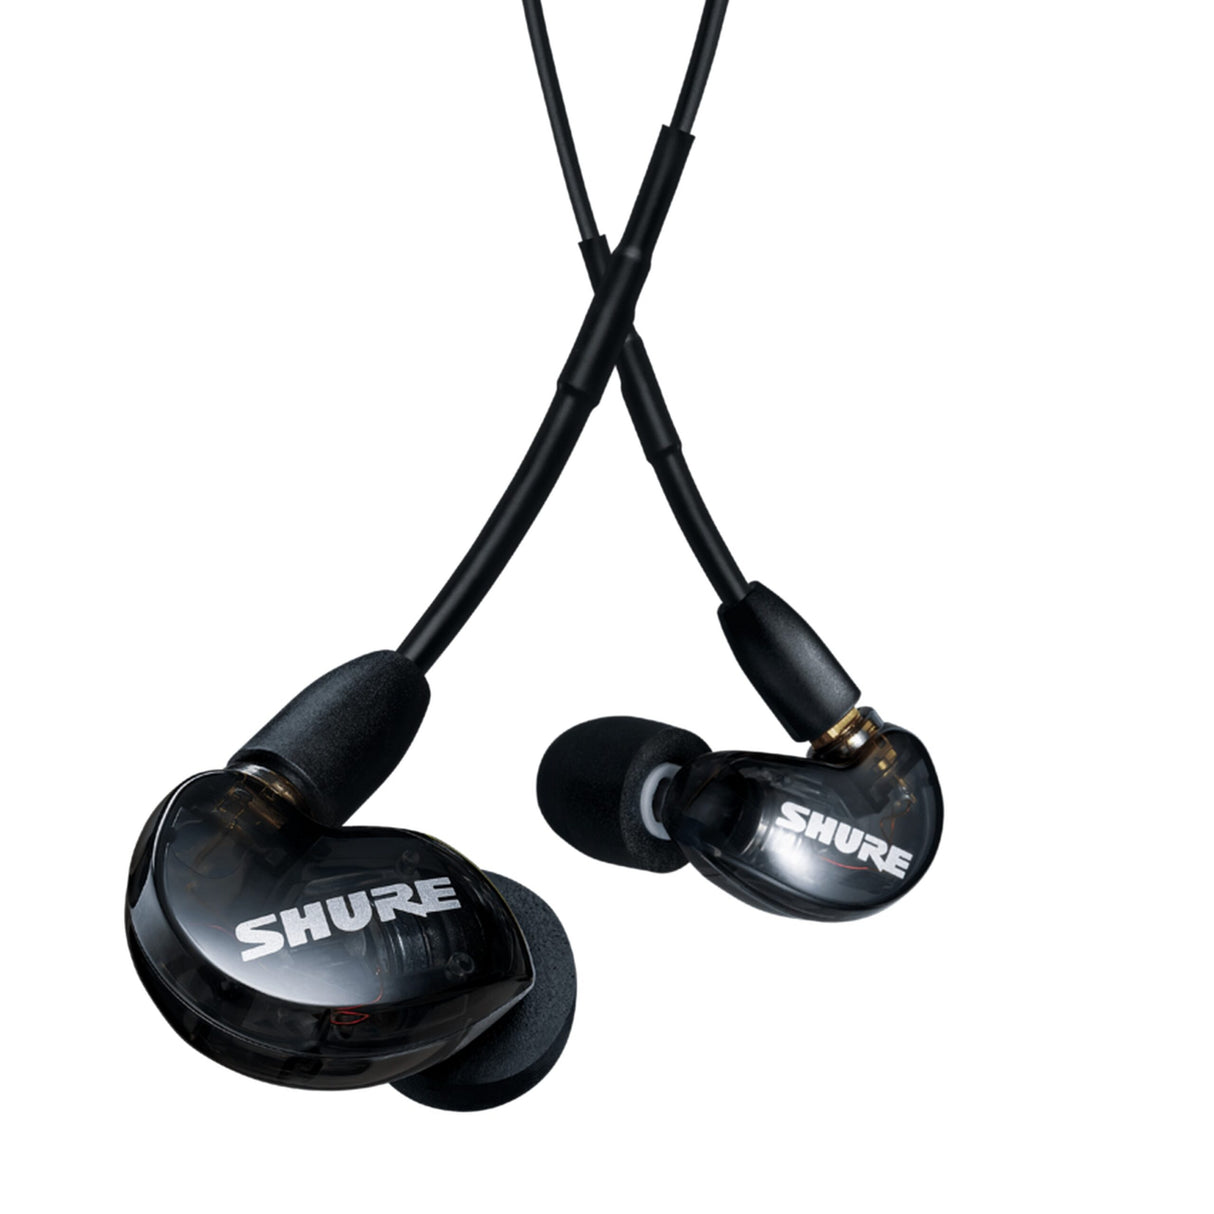 Shure AONIC 215 SE215DYBK+UNI Wired Sound Isolating In-Ear Headphone, Black